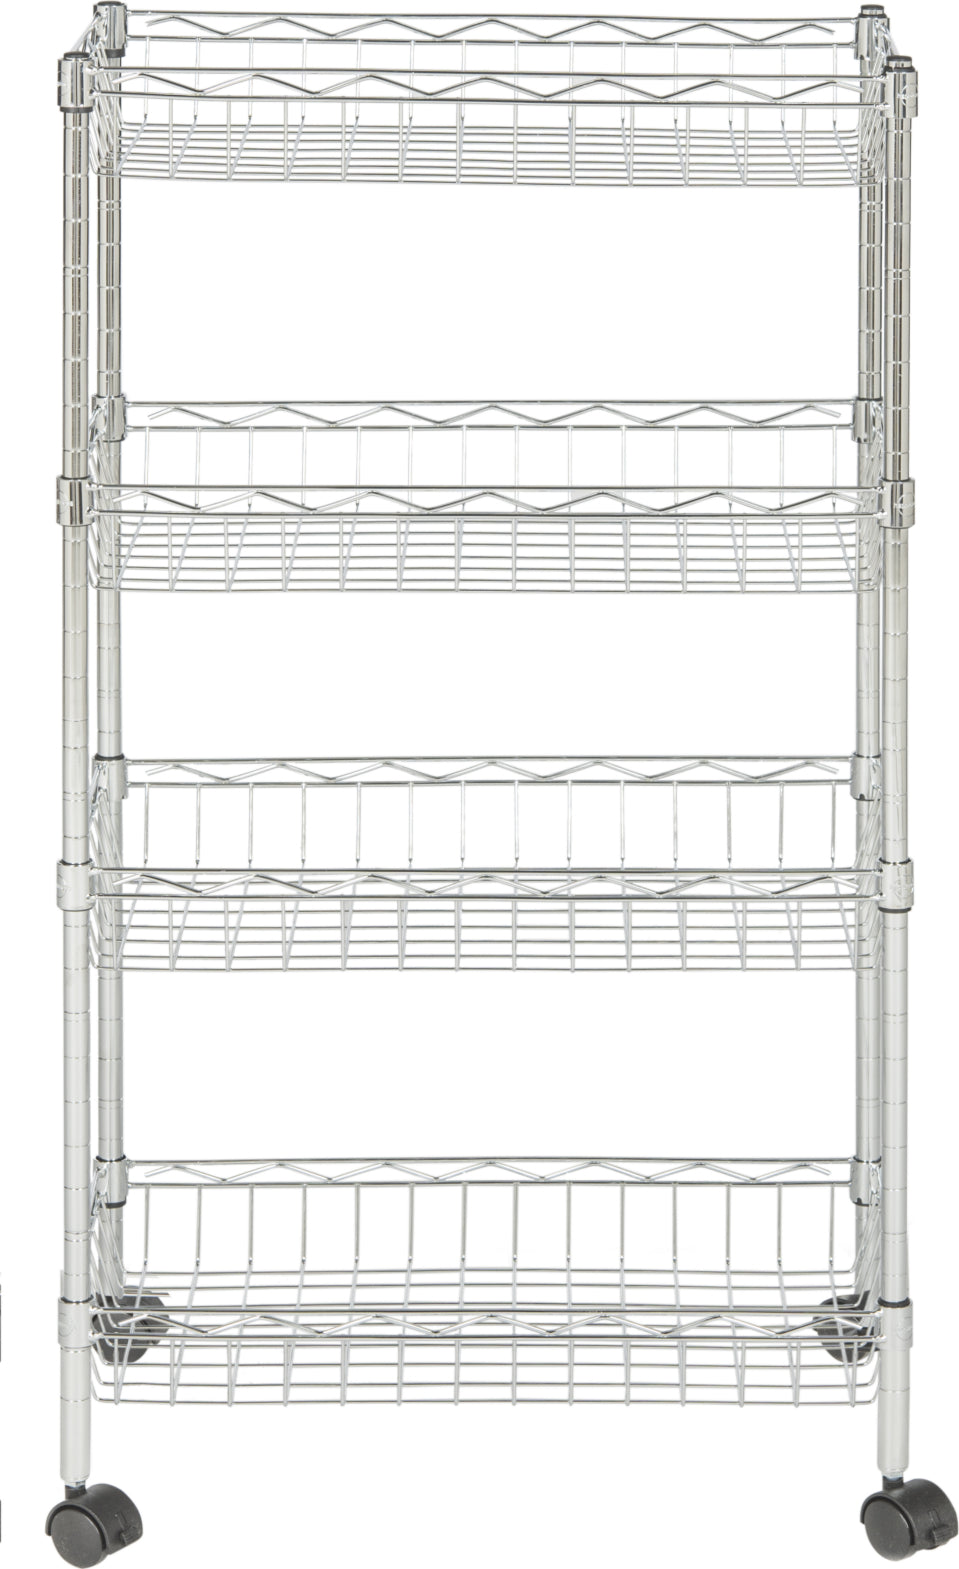 Safavieh Mario 4 Tier Chrome Wire Basket Rack Happimess By (236 In W X 138 D 472 H) Furniture main image